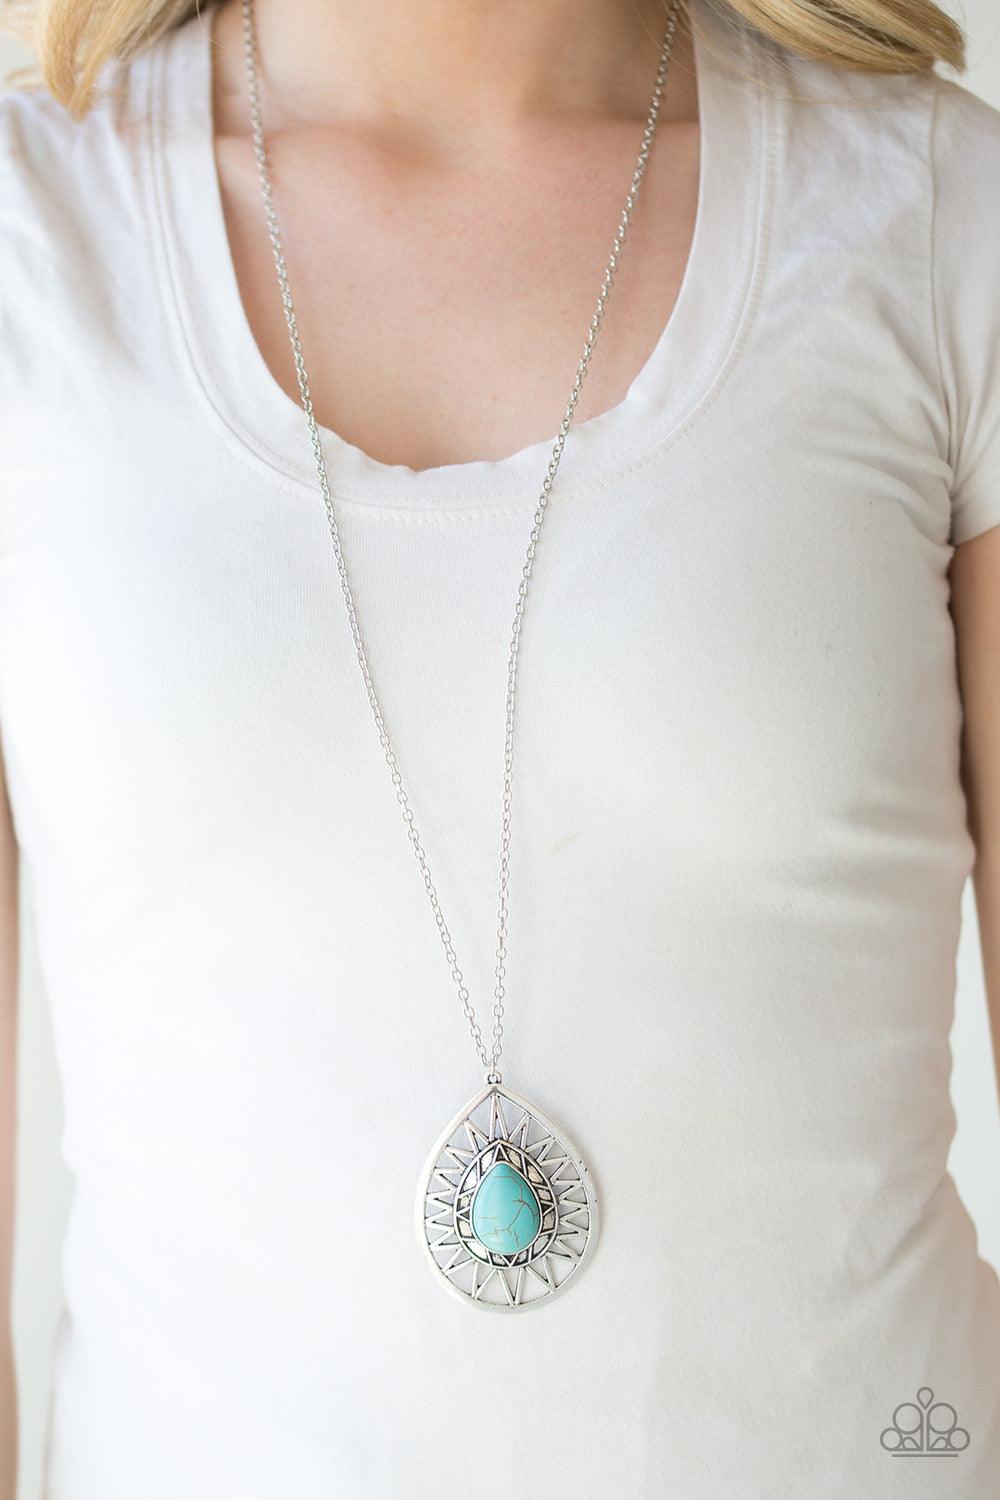 Paparazzi Accessories Summer Sunbeam - Blue A refreshing turquoise stone is pressed into the center of a large silver teardrop radiating with shimmery sunburst patterns. The tribal inspired pendant swings from the bottom of a lengthened silver chain for a